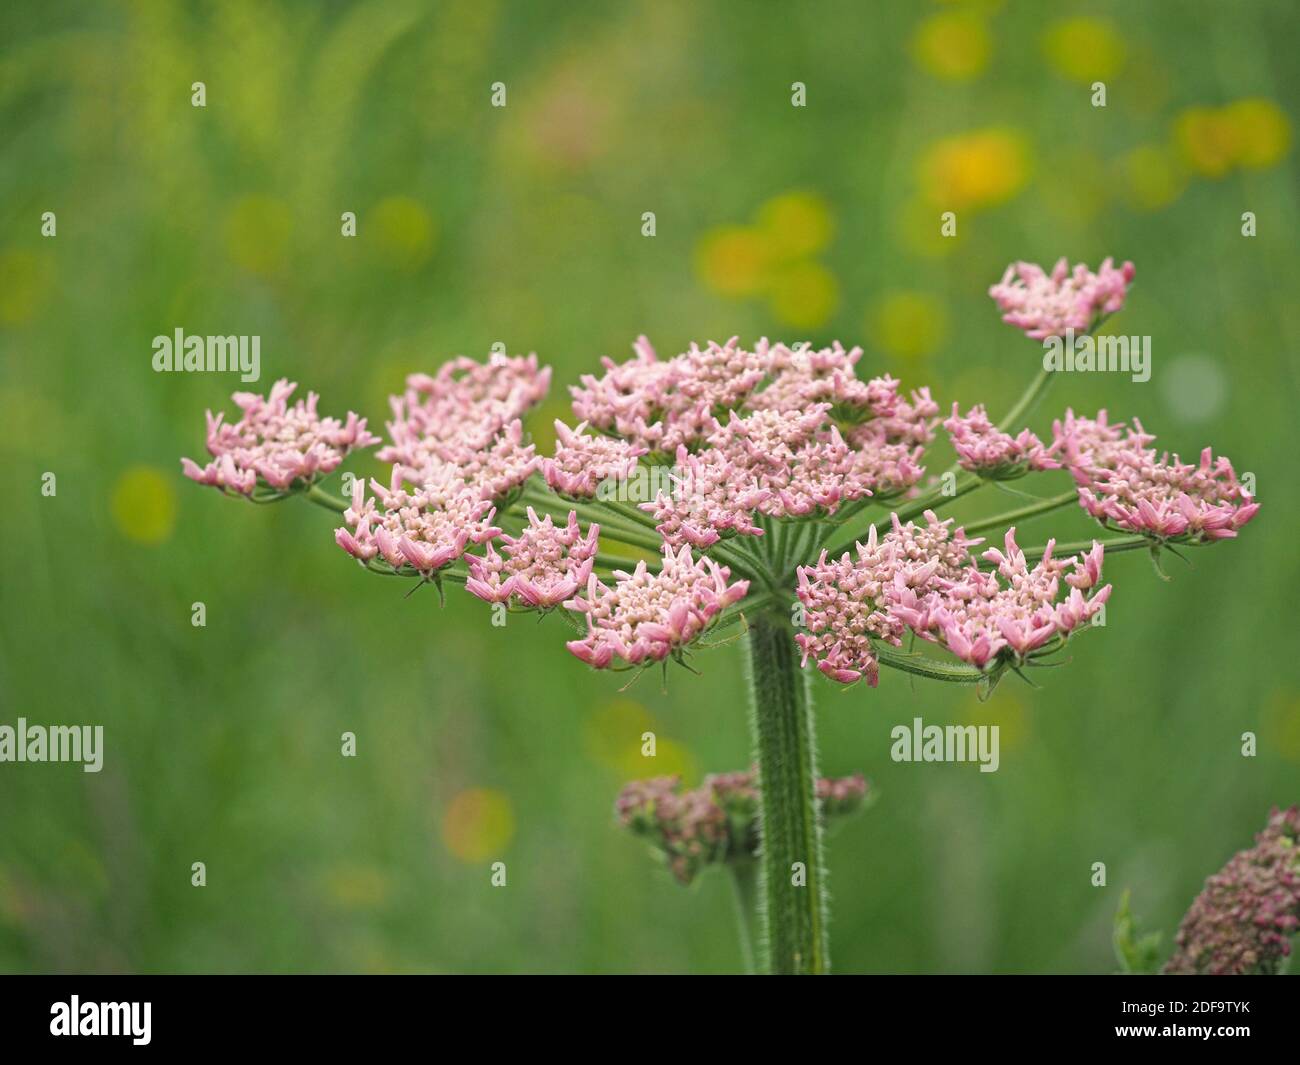 umbel of pink compound flowers of Common Hogweed or Cow parsnip (Heracleum sphondylium) with yellow buttercups in background in Cumbria, England,UK Stock Photo